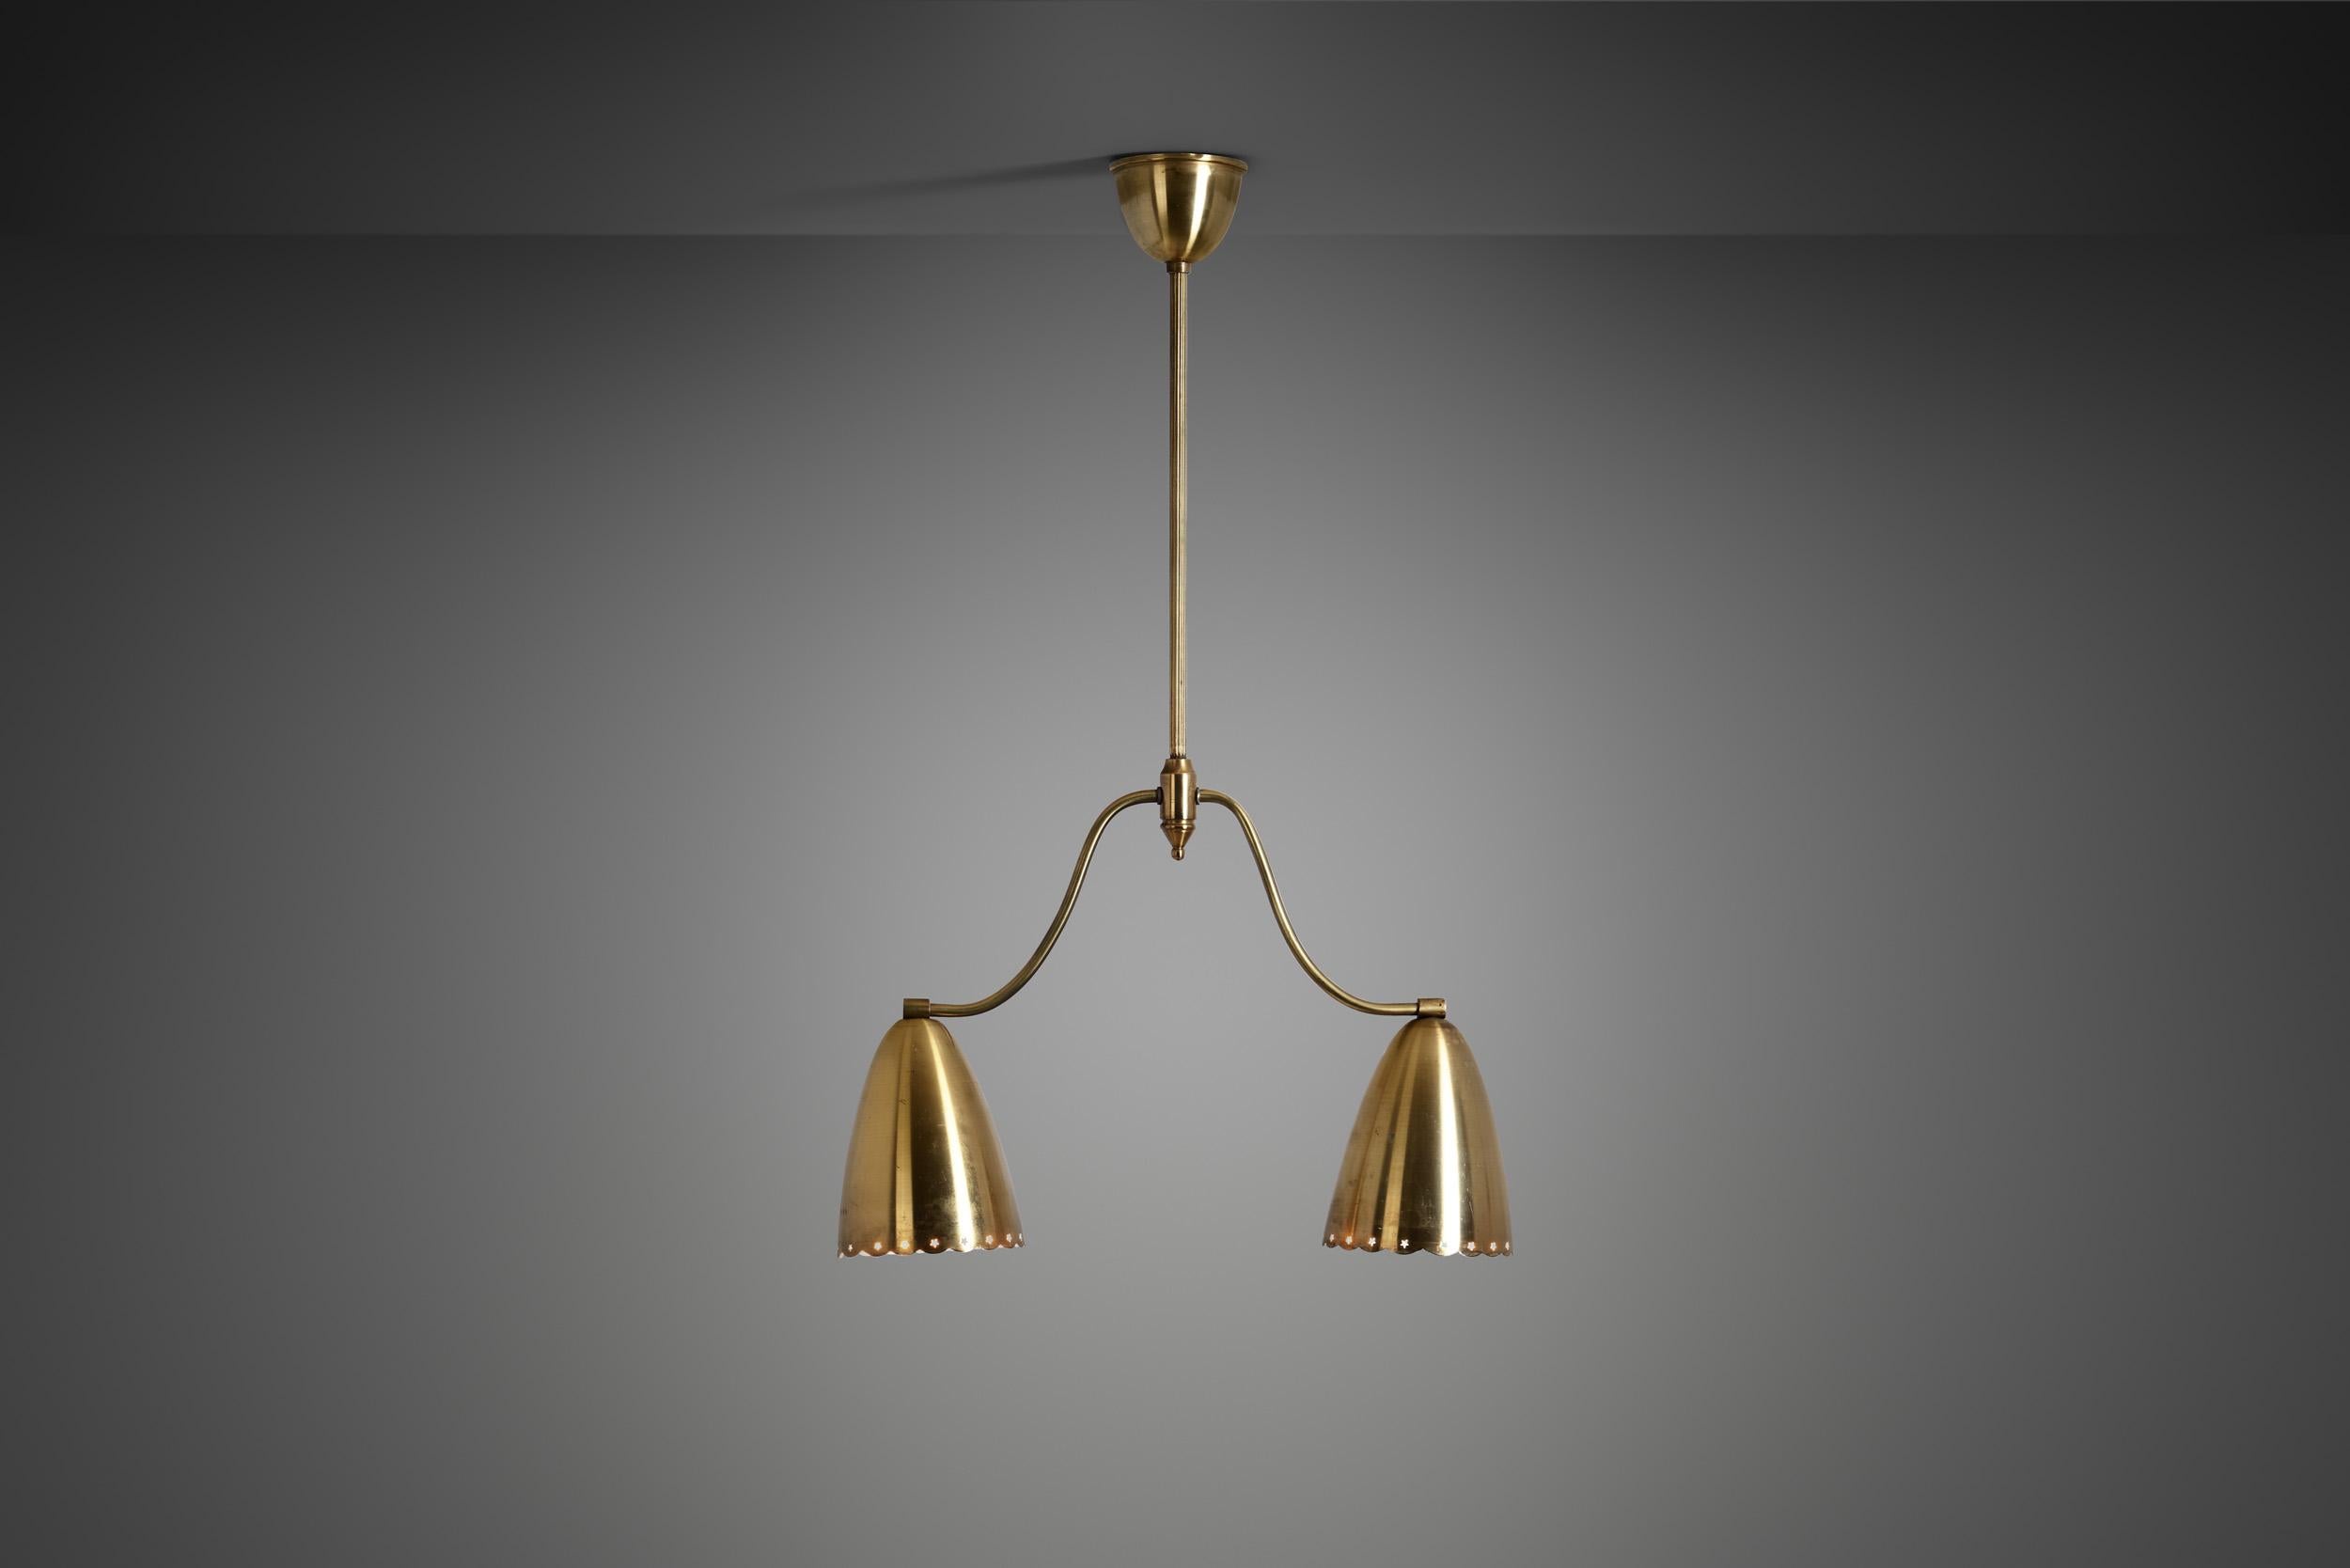 Brass Swedish Two-Arm Ceiling Light with Star Decoration, Sweden, 1940s